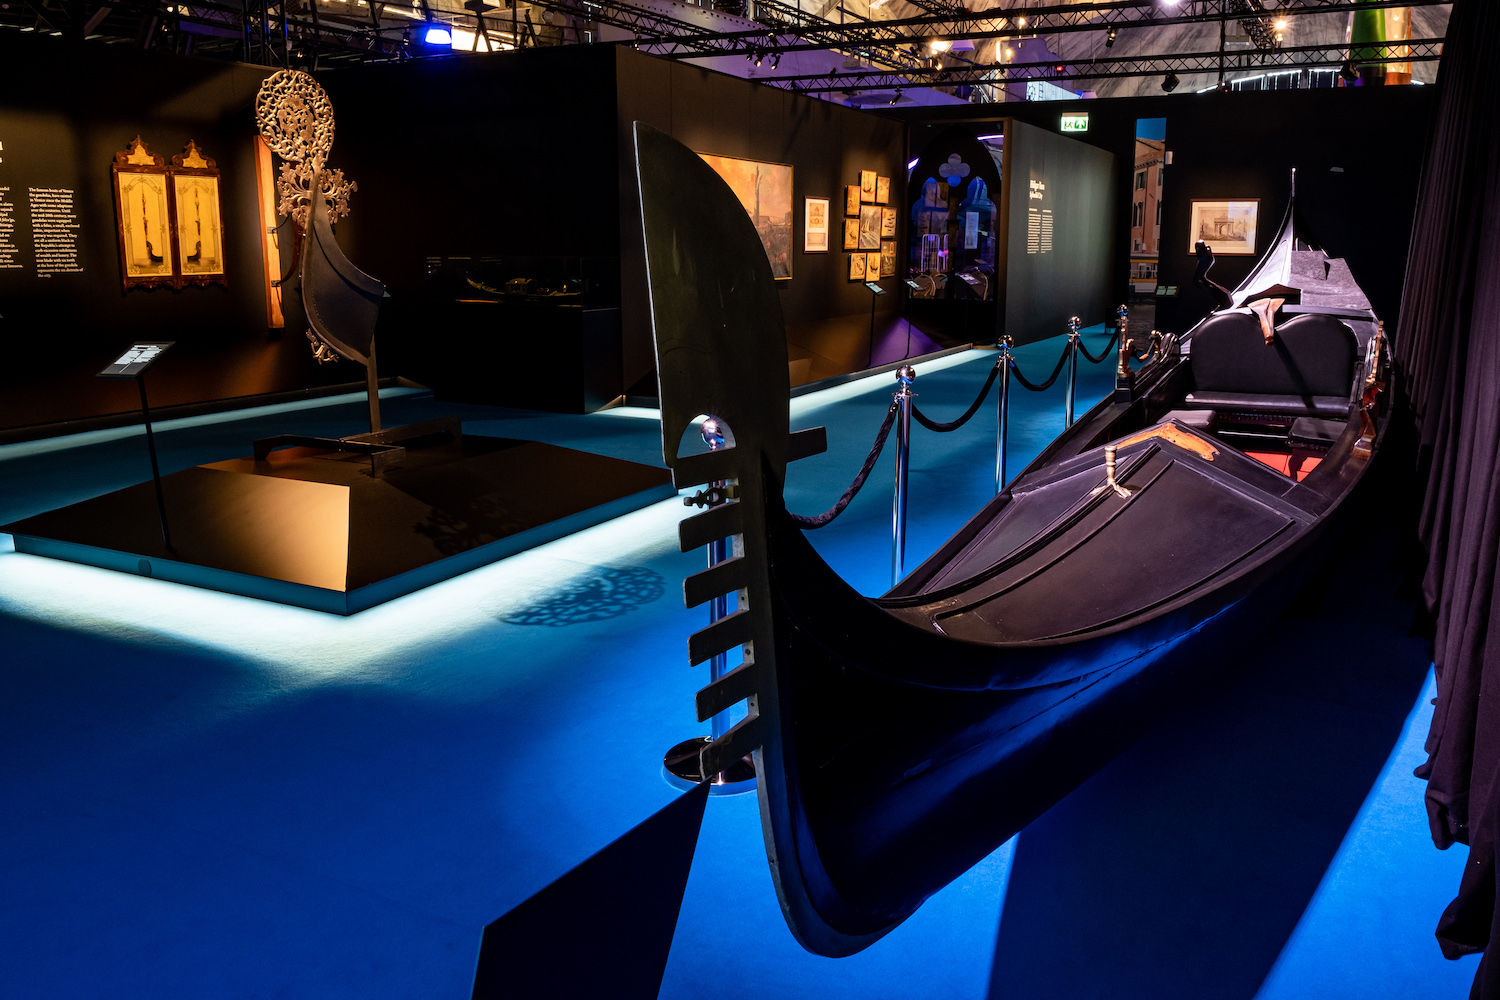 The rich history of Venice is alive in Tallinn’s Seaplane Harbour Museum